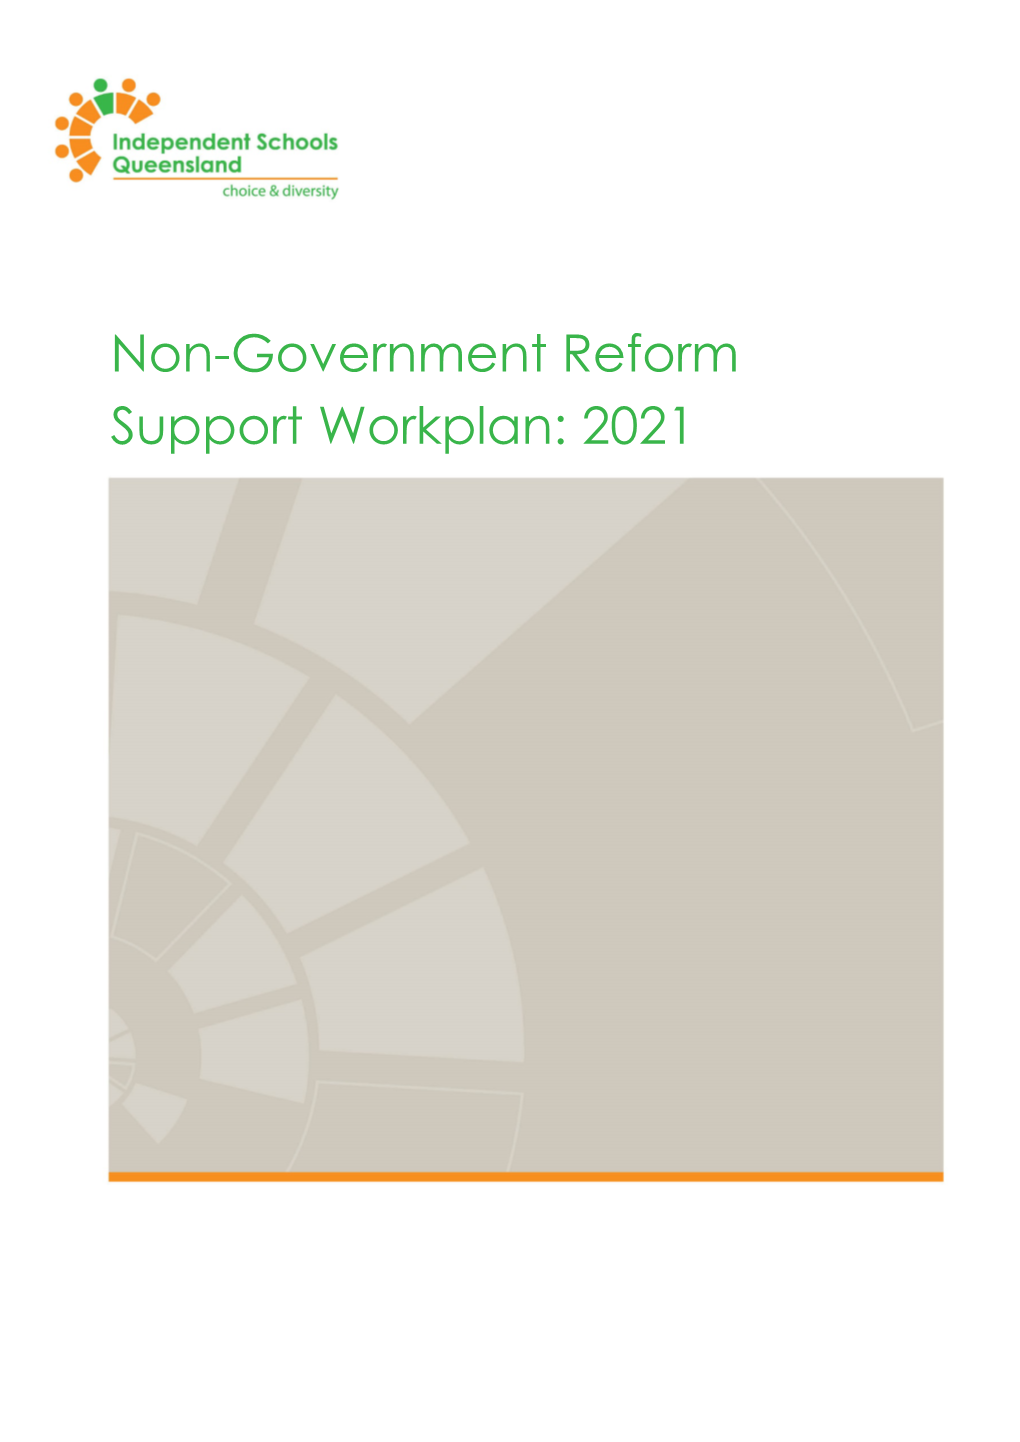 Non-Government Reform Support Workplan: 2021